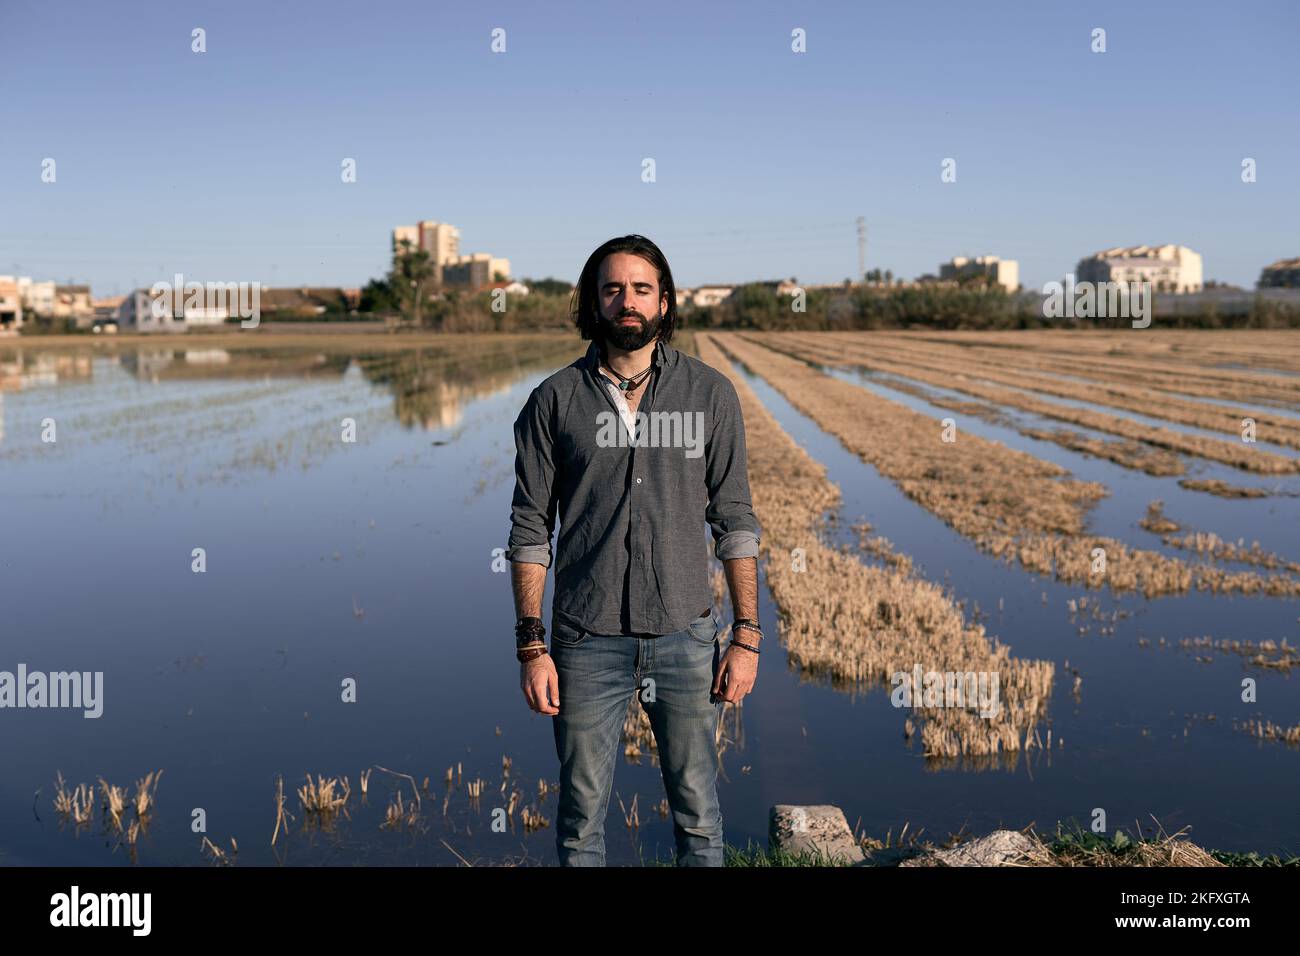 young caucasian man with long hair beard and gray shirt looking at camera with closed eyes in a field flooded with water Stock Photo